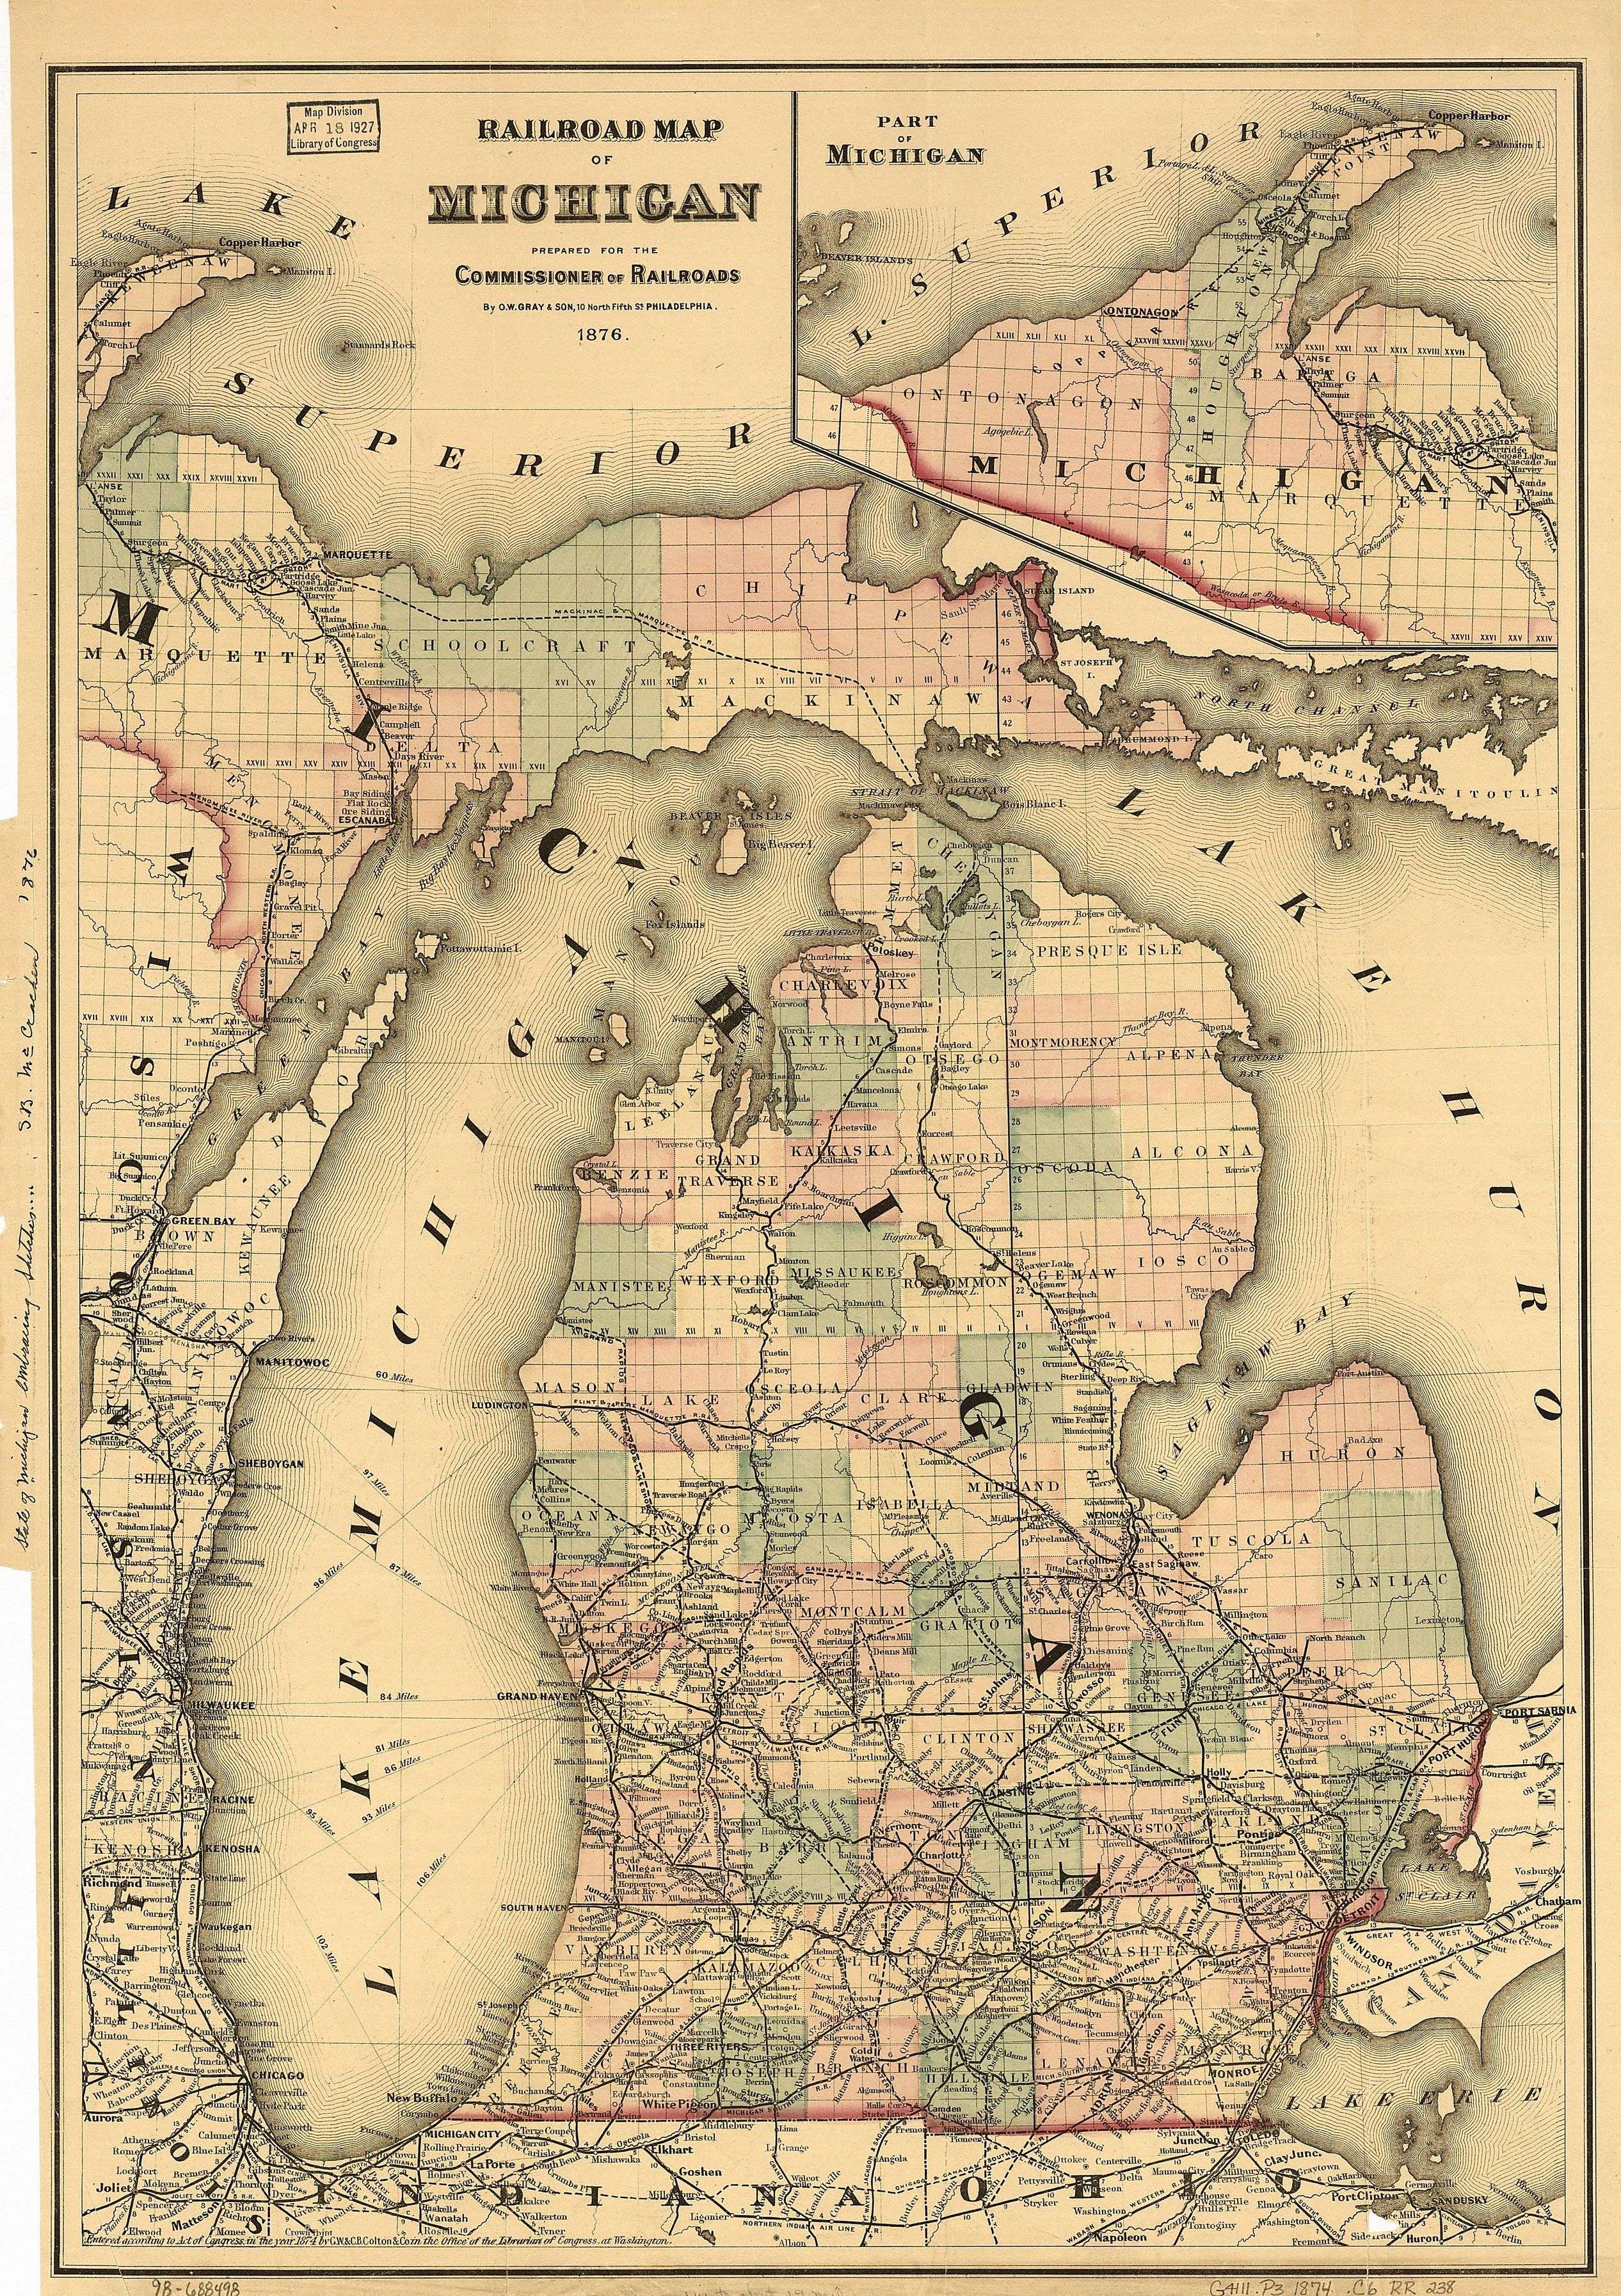 In 1873, railroads connected Northern Michigan port cities of Ludington, Traverse City and Petoskey. By 1880 the Great Lakes region would dominate logging, with Michigan producing more lumber than any other state.